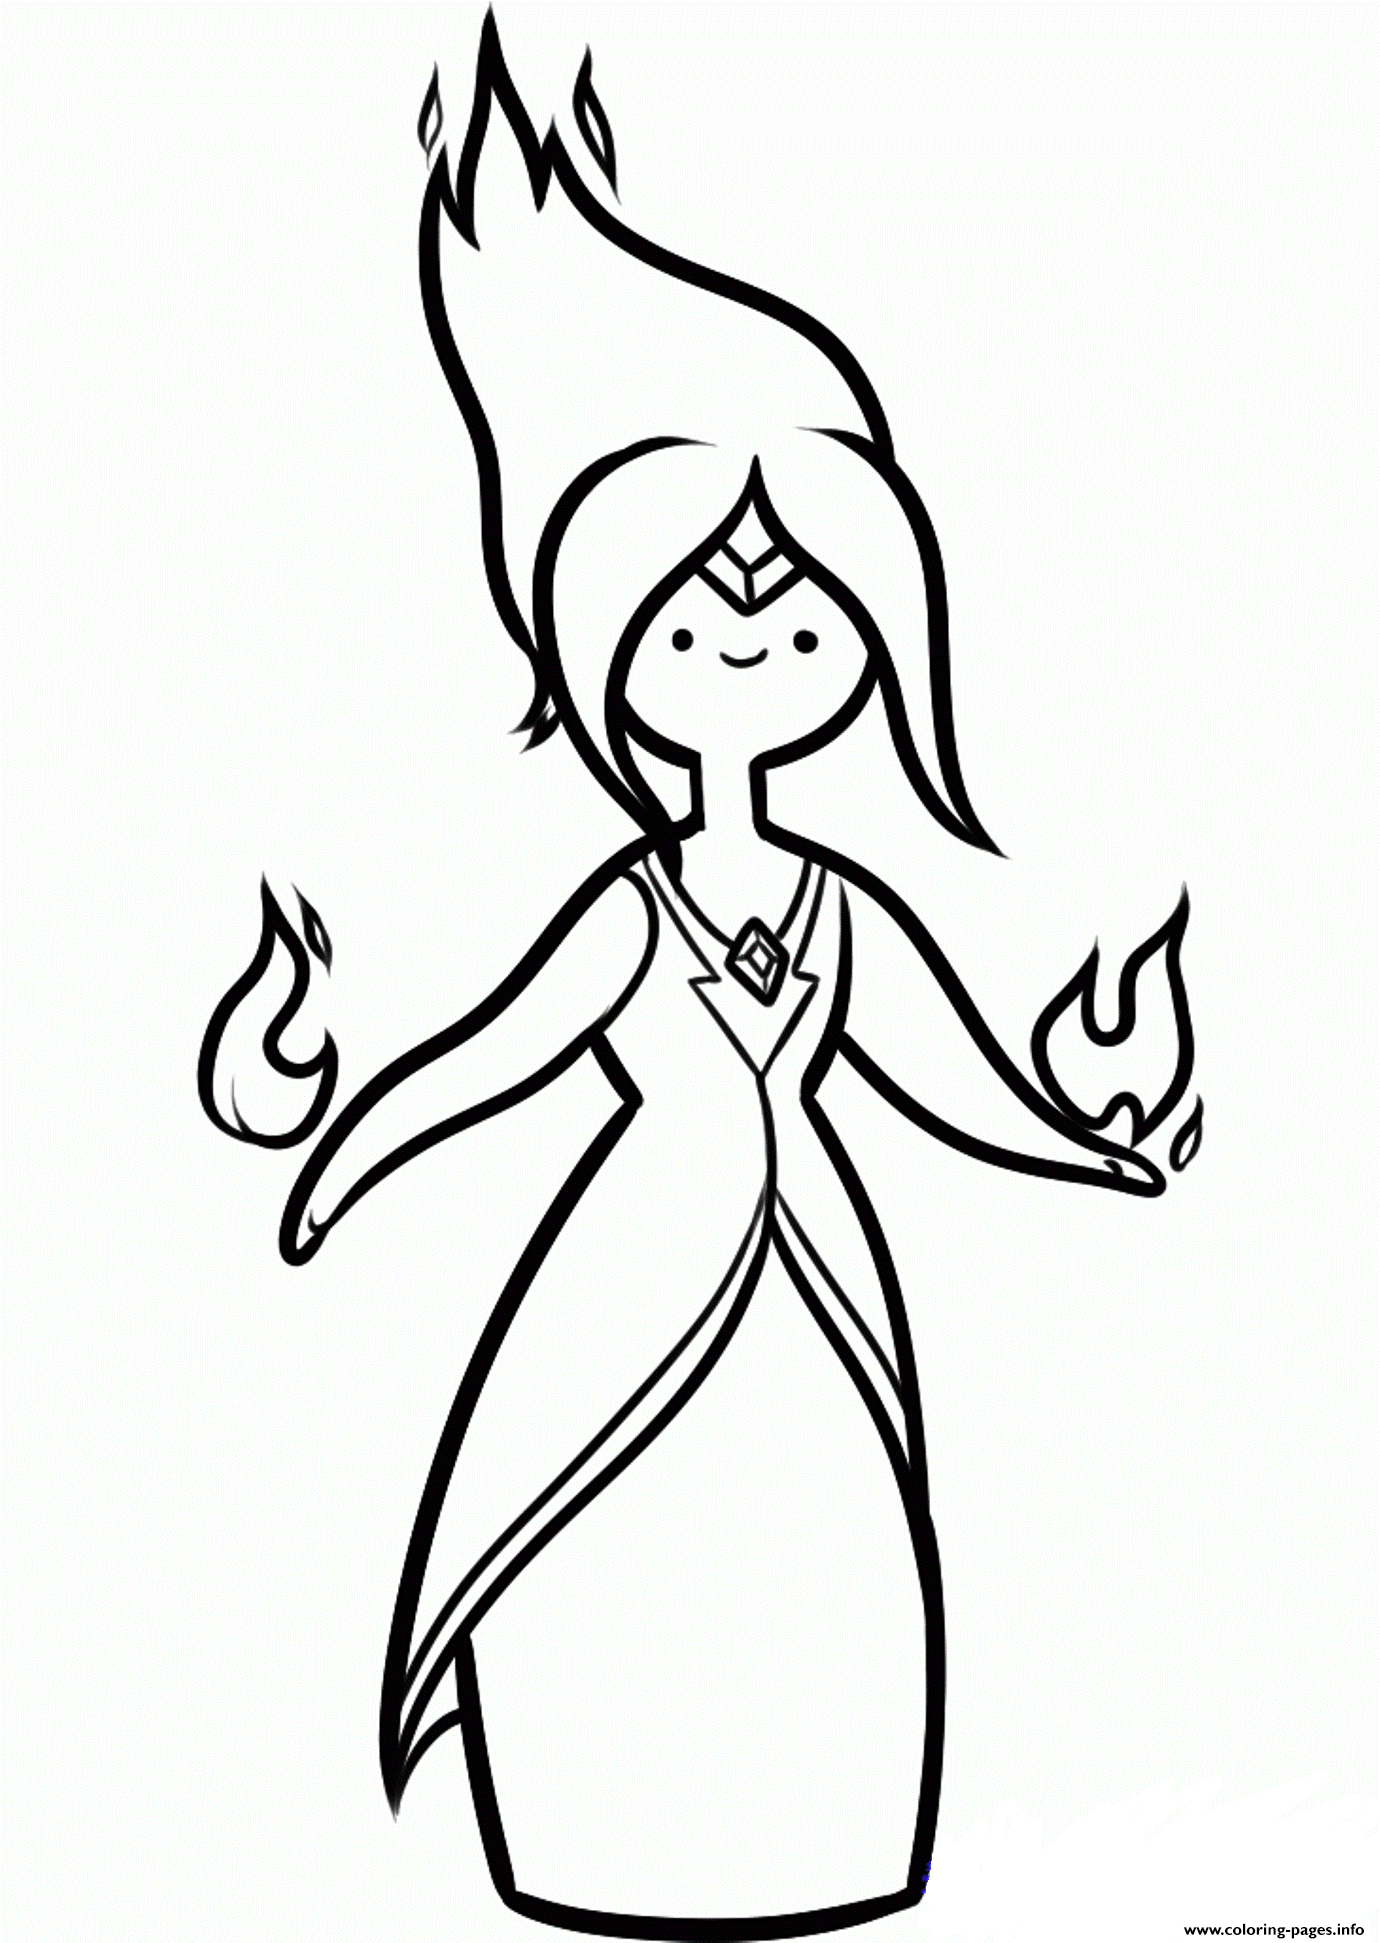 Printable Adventure Time Coloring Pages Princess Flame Adventure Time S6f46 Coloring Pages Printable